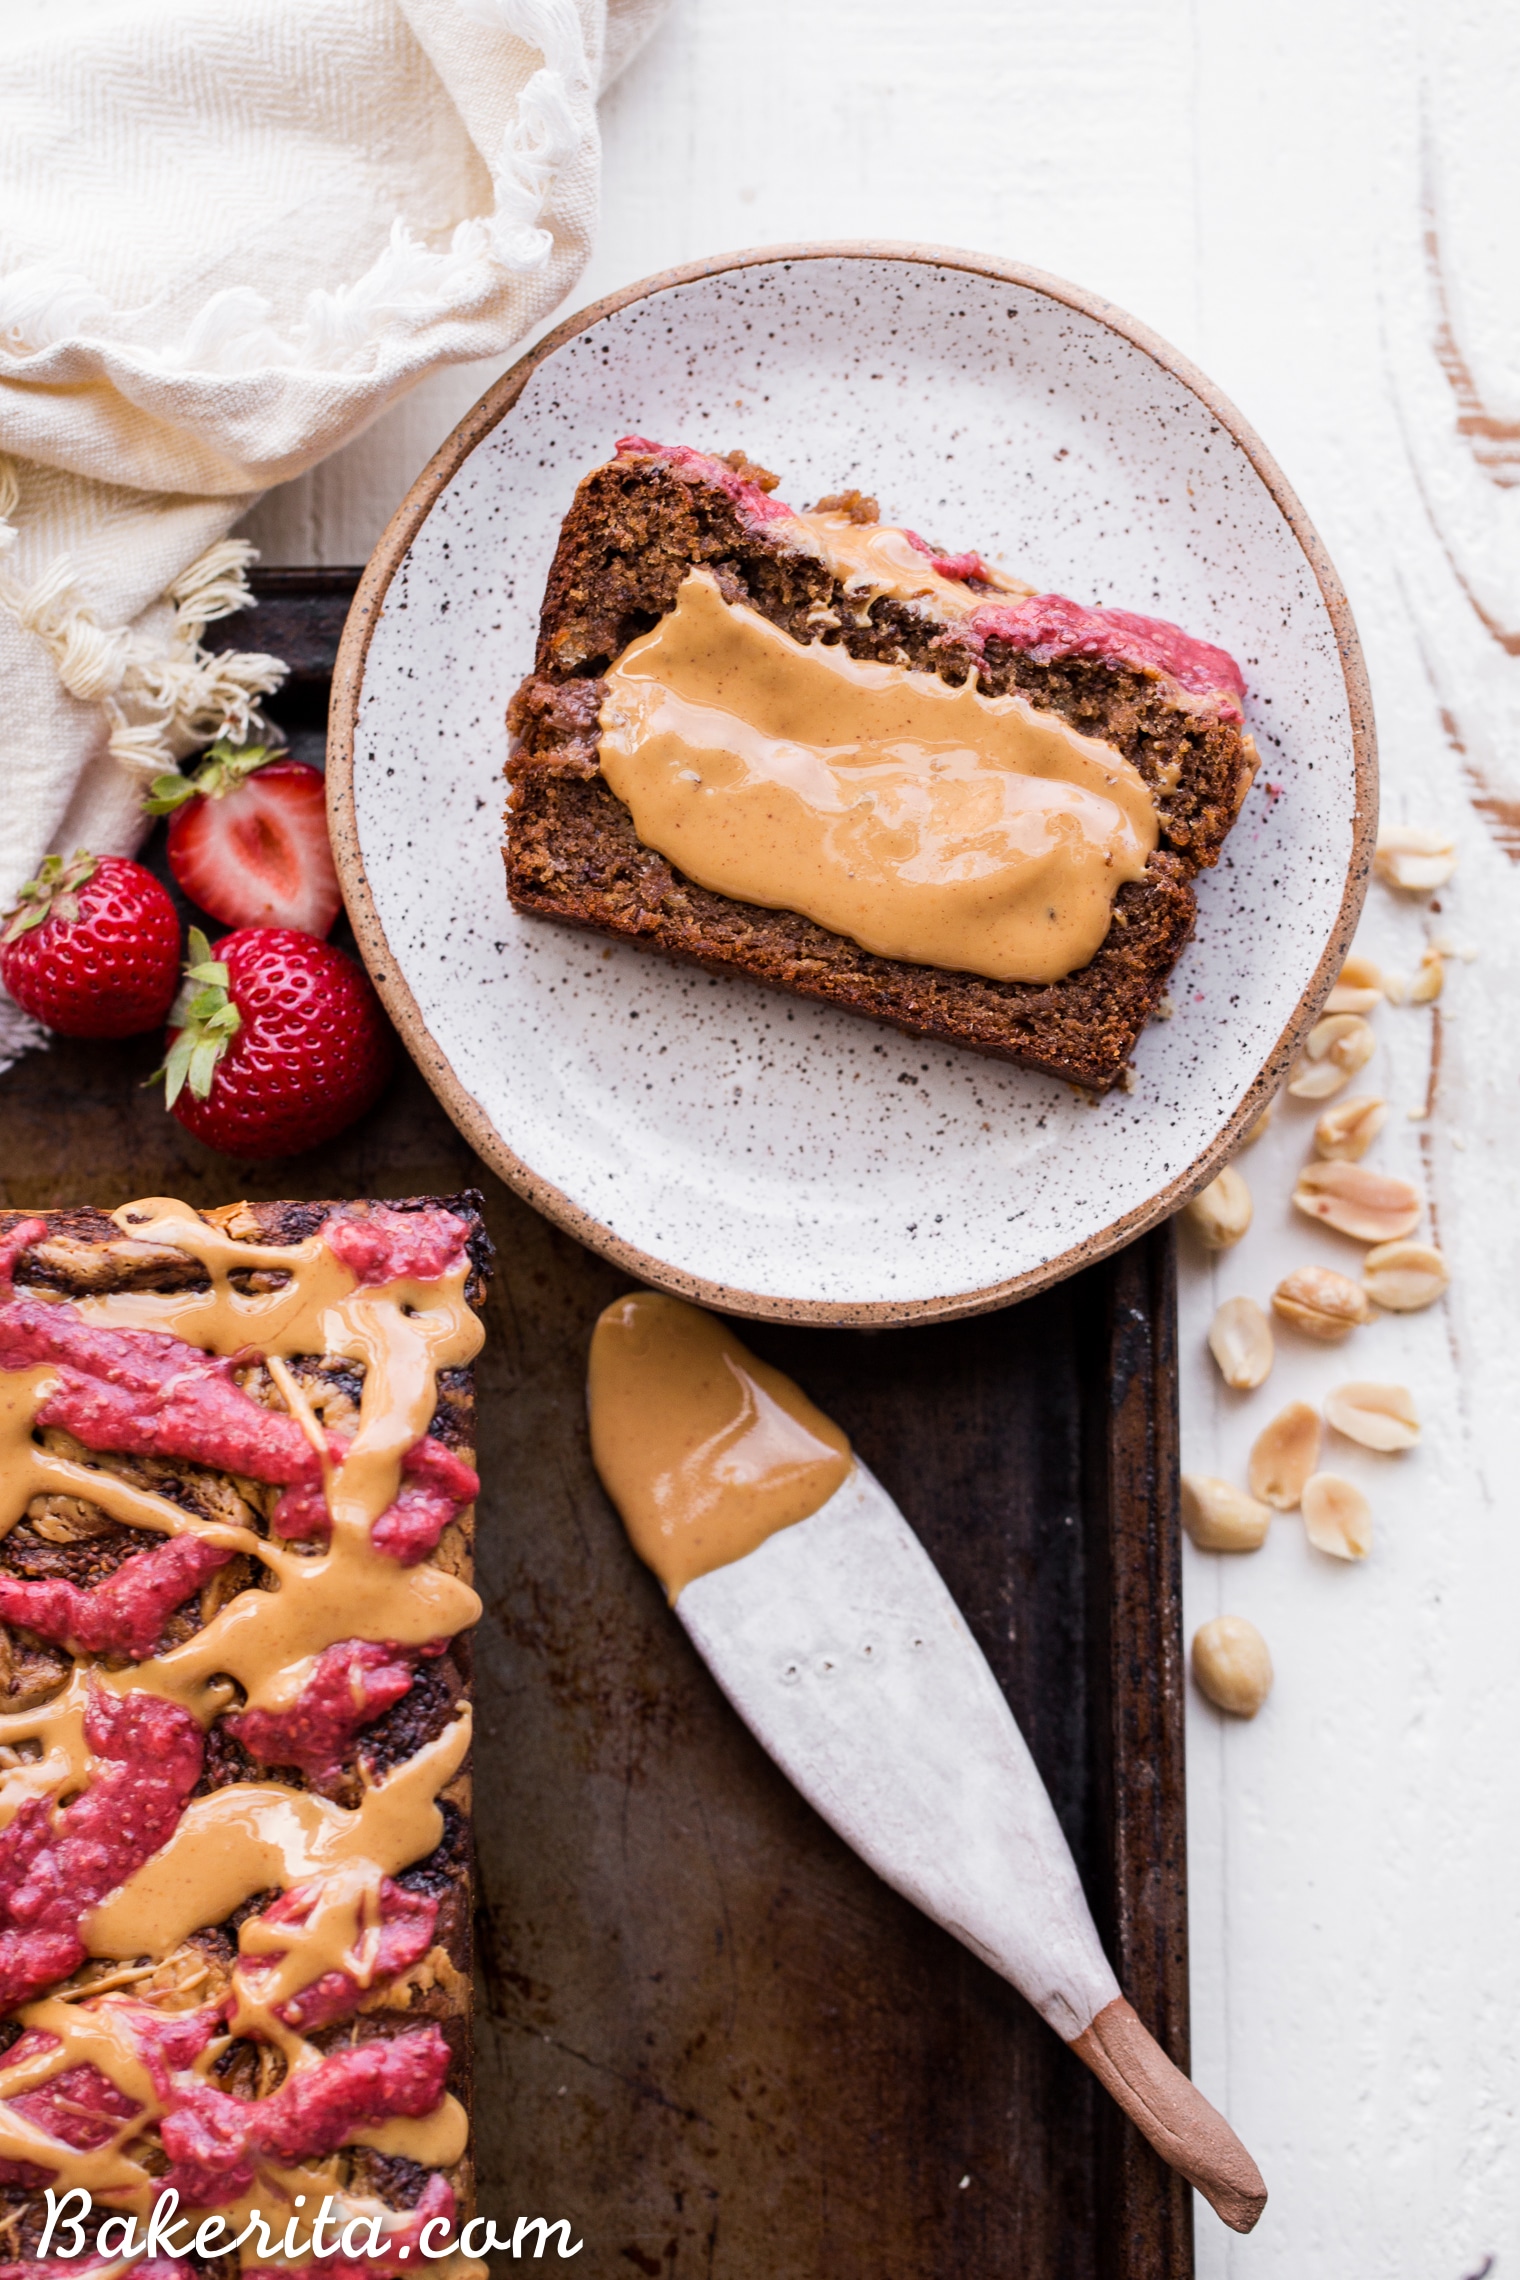 This Peanut Butter & Jelly Banana Bread will remind you of a PB&J sandwich, but in soft & sweet banana bread form. This recipe is gluten-free, vegan, and layered with homemade strawberry chia jam and creamy peanut butter.